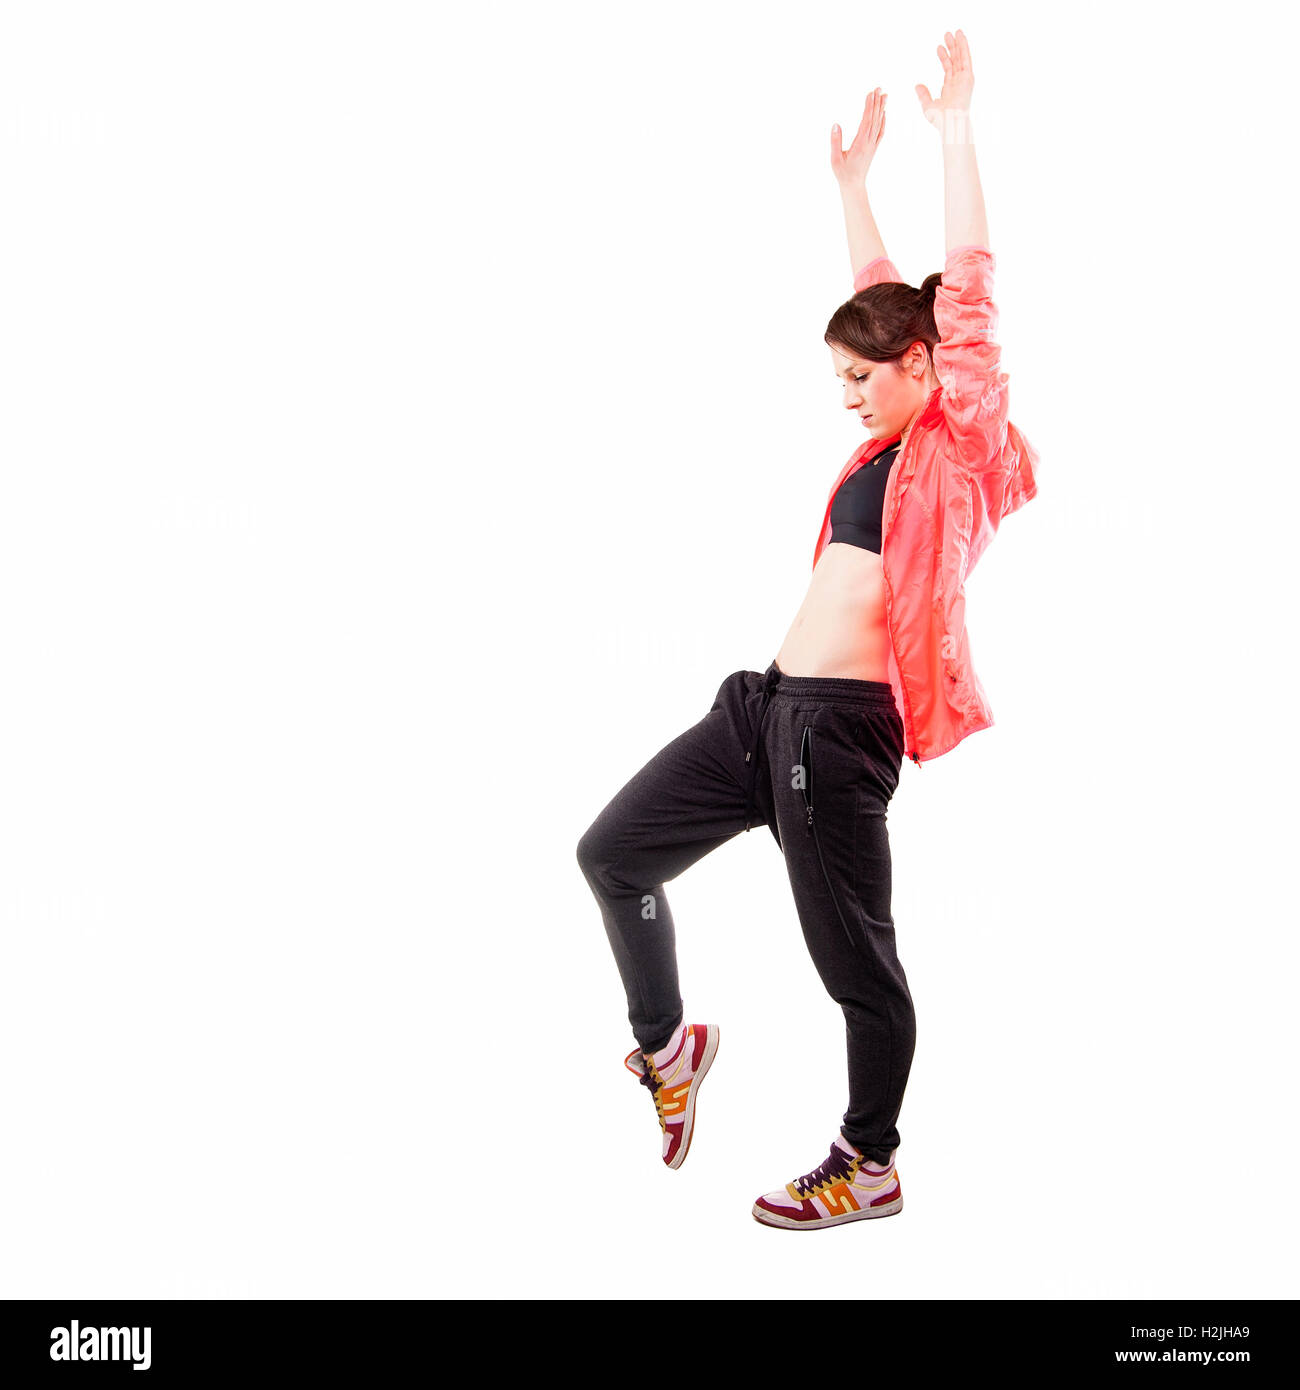 modern style dancer posing with hands up in studio background Stock Photo